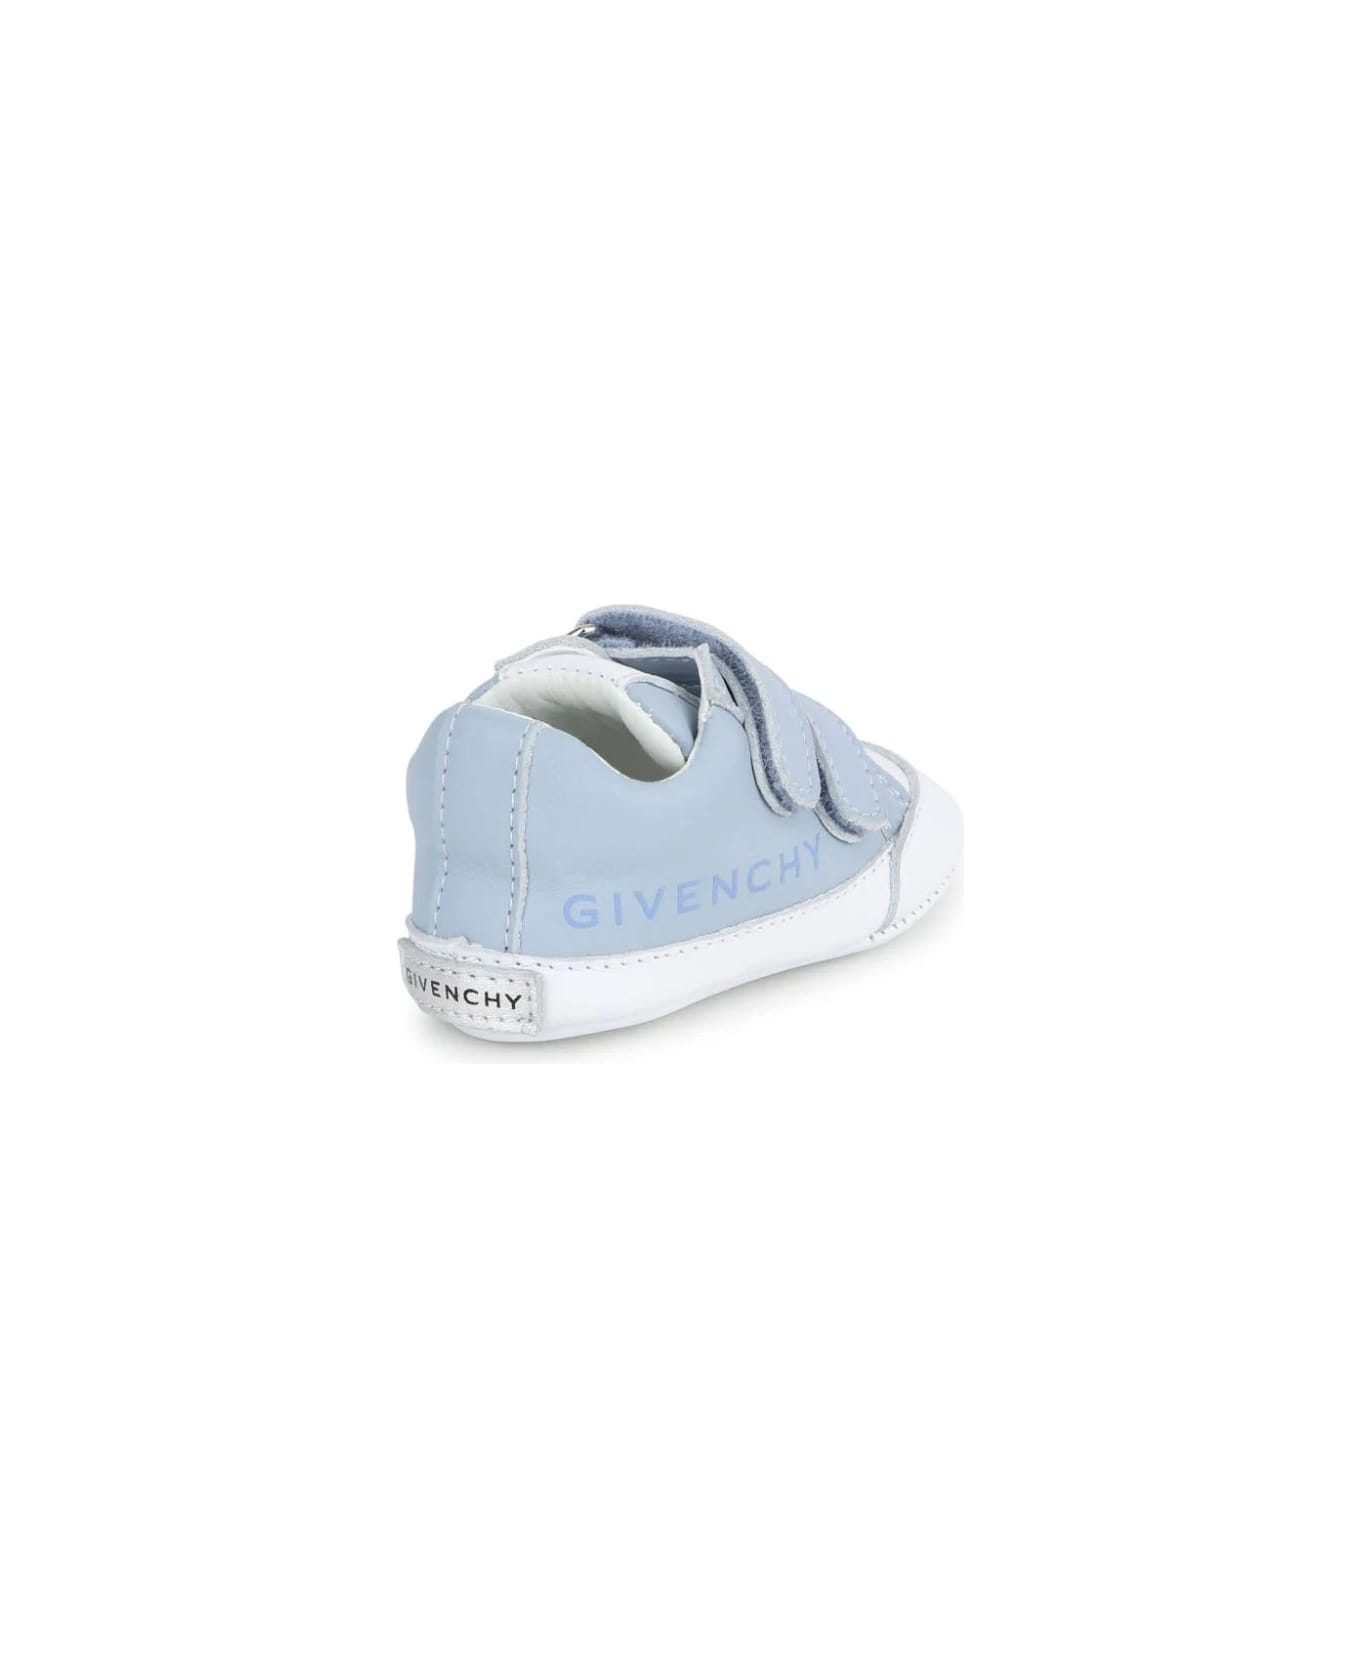 Givenchy Light Blue And White Sneakers With Logo - Blue シューズ